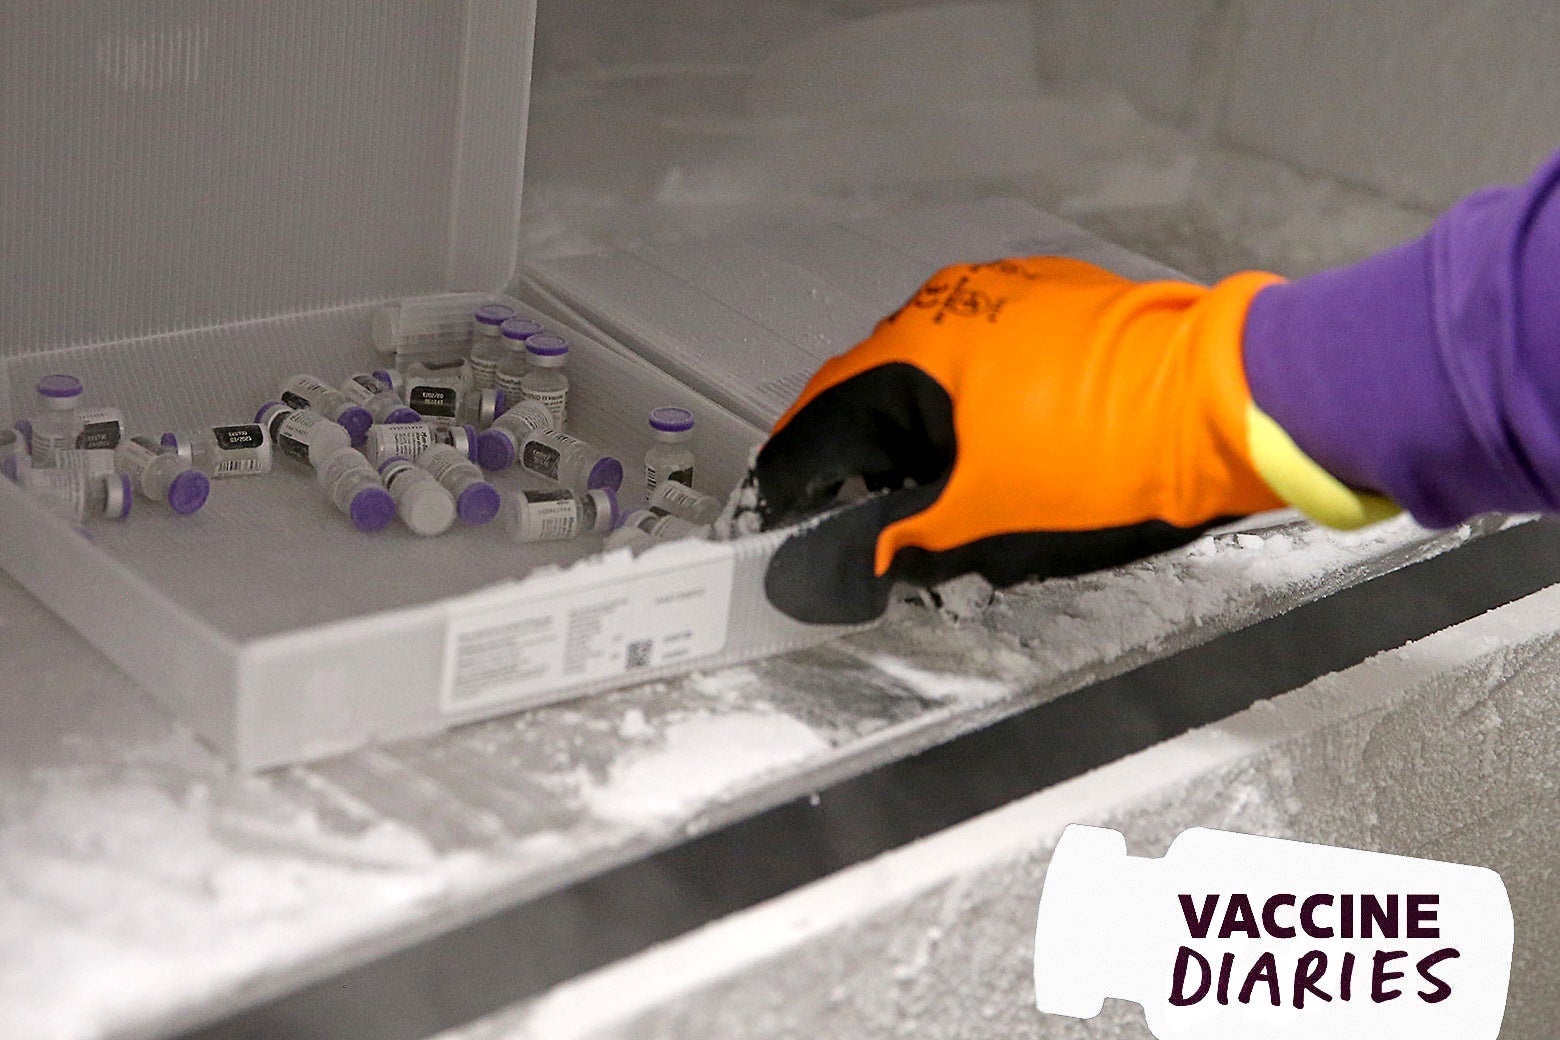 A gloved hand pulls COVID-19 vaccine vials out of a freezer.